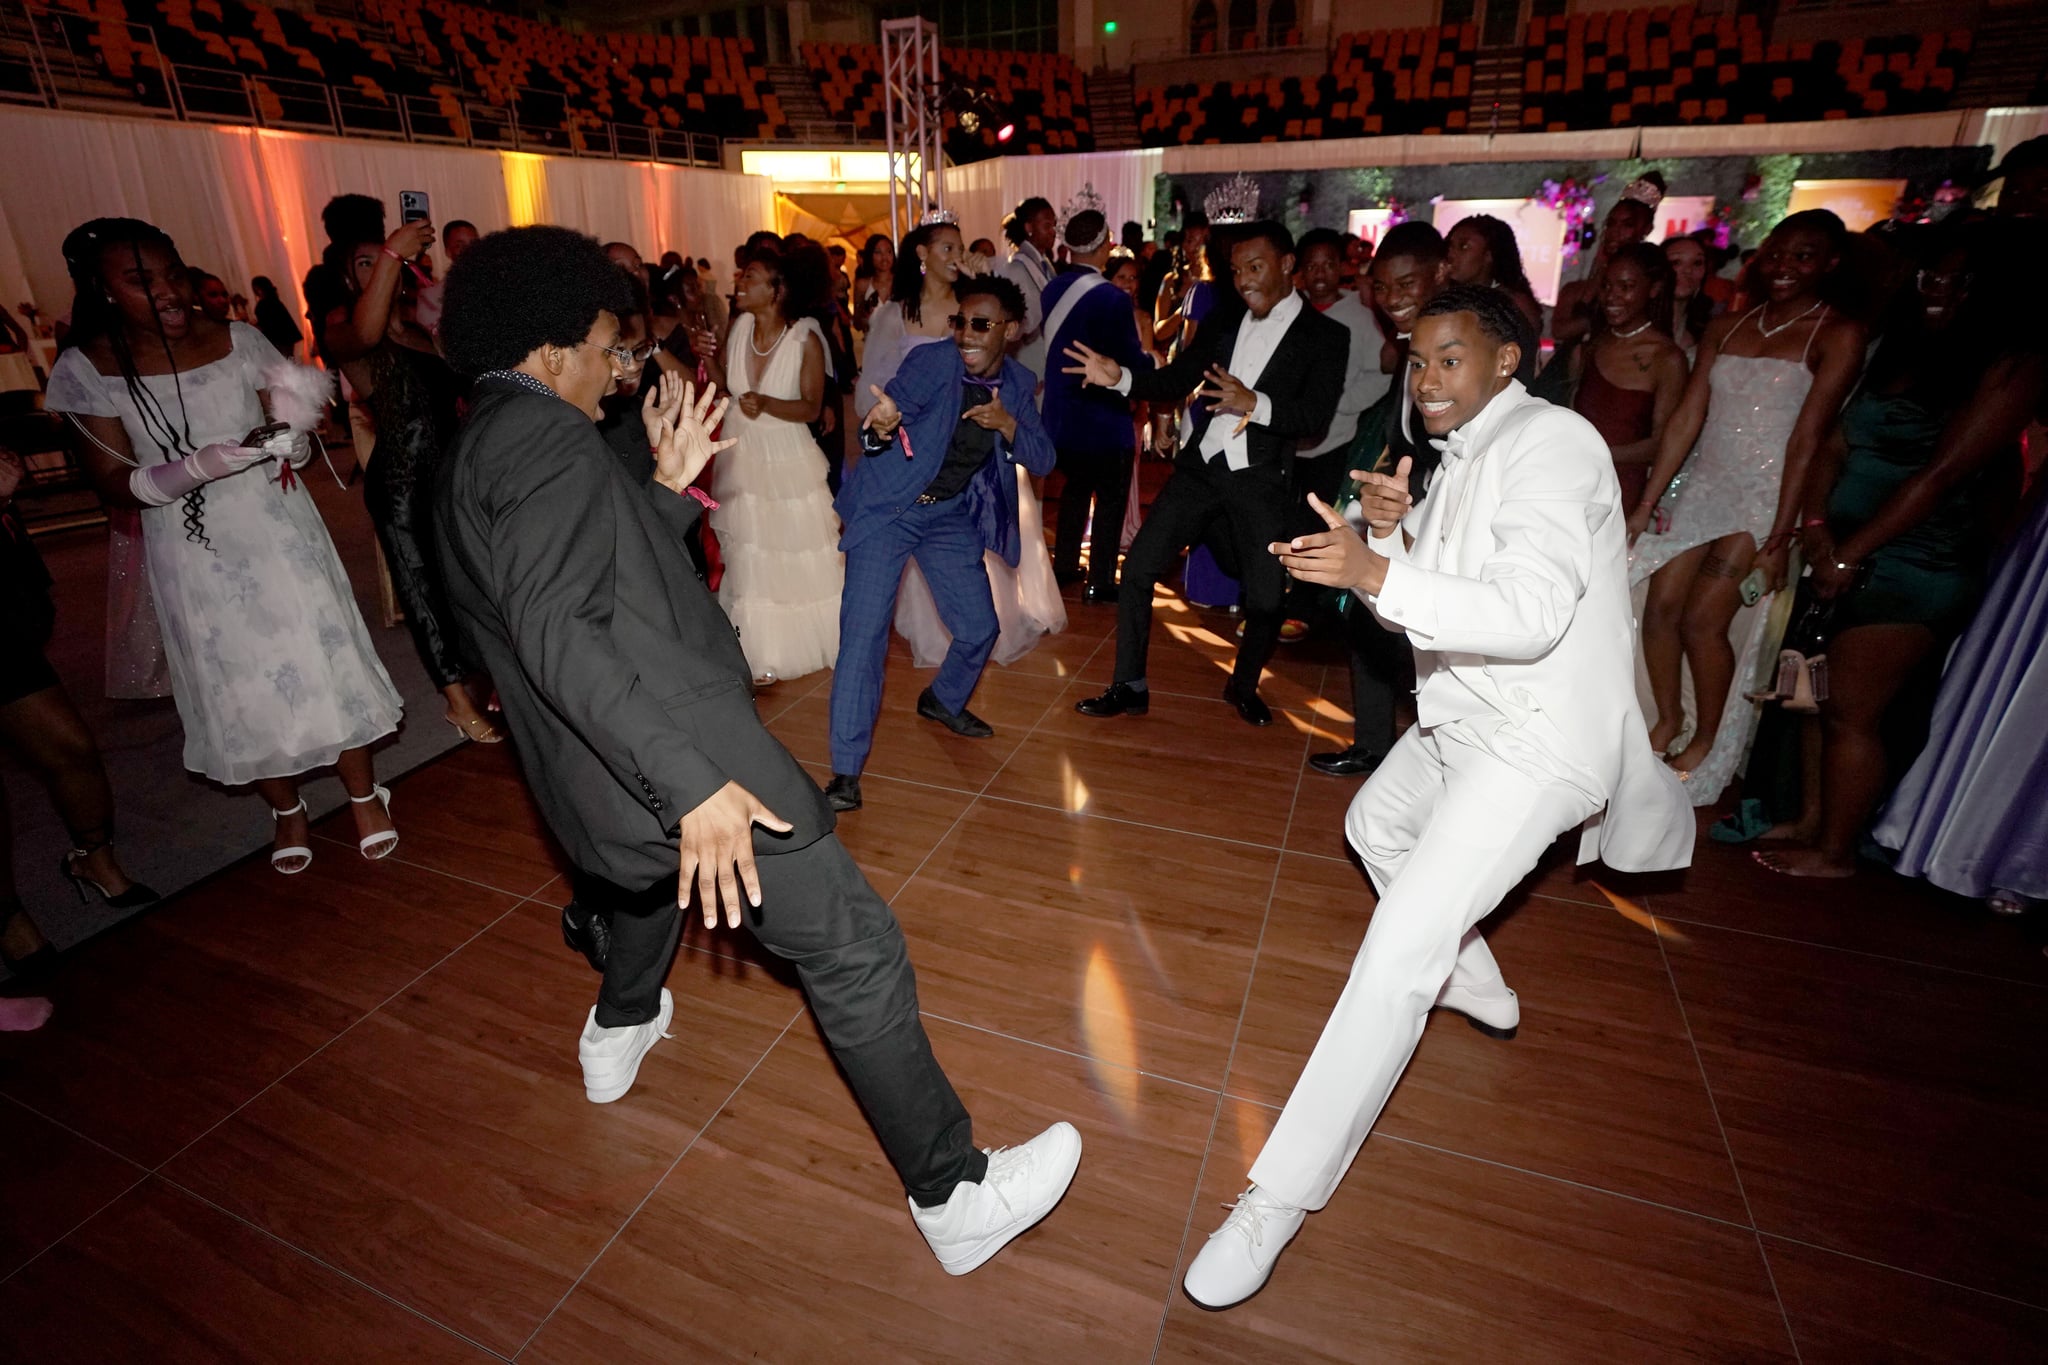 NEW ORLEANS, LOUISIANA - APRIL 15: A view of guests on the dance floor during the Queen Charlotte Spring Waltz at Xavier University on April 15, 2023 in New Orleans, Louisiana. (Photo by Erika Goldring/Getty Images for Netflix)